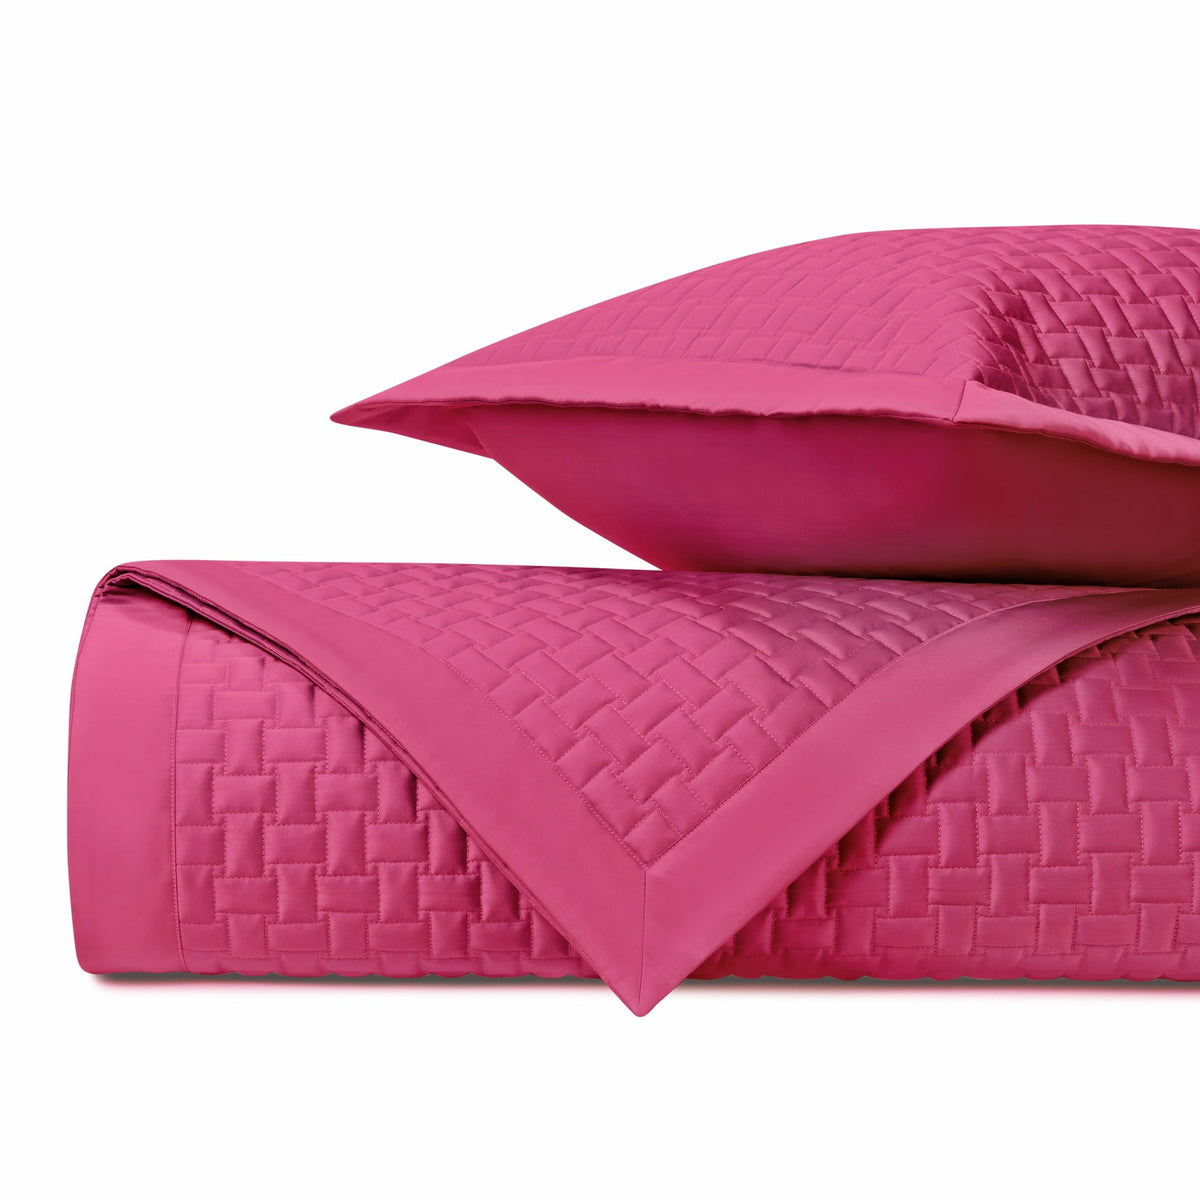 Home Treasures Wicker Quilted Bedding Bright Pink Fine Linens